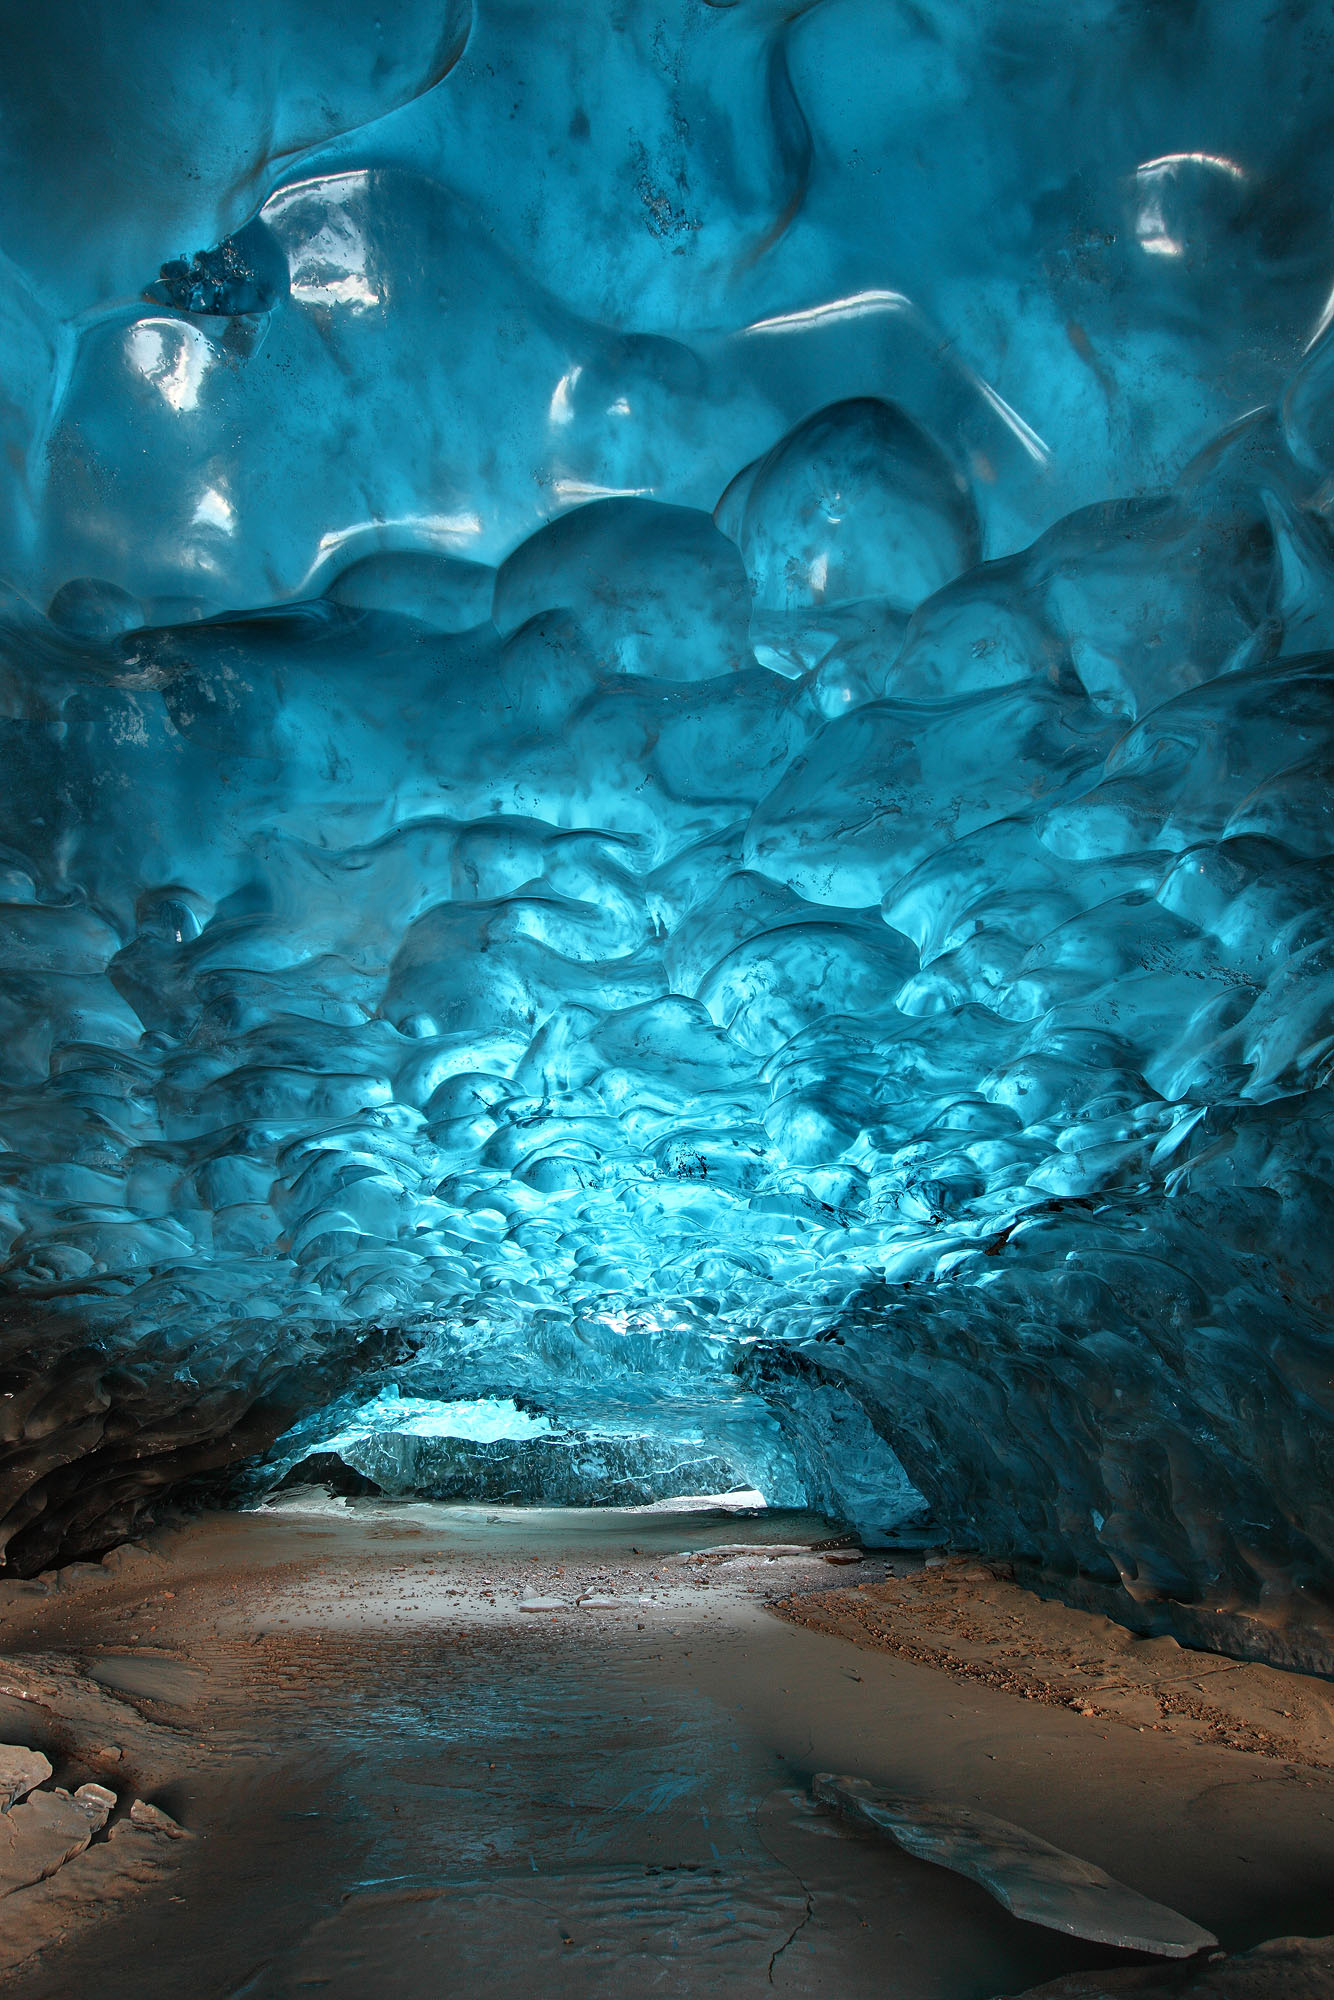 Otherworldly appearing and awe-inspiring ice cave tunnel within Svínafellsjökull glacier in Skaftafell, Iceland, with deep-blue meltwater shapes